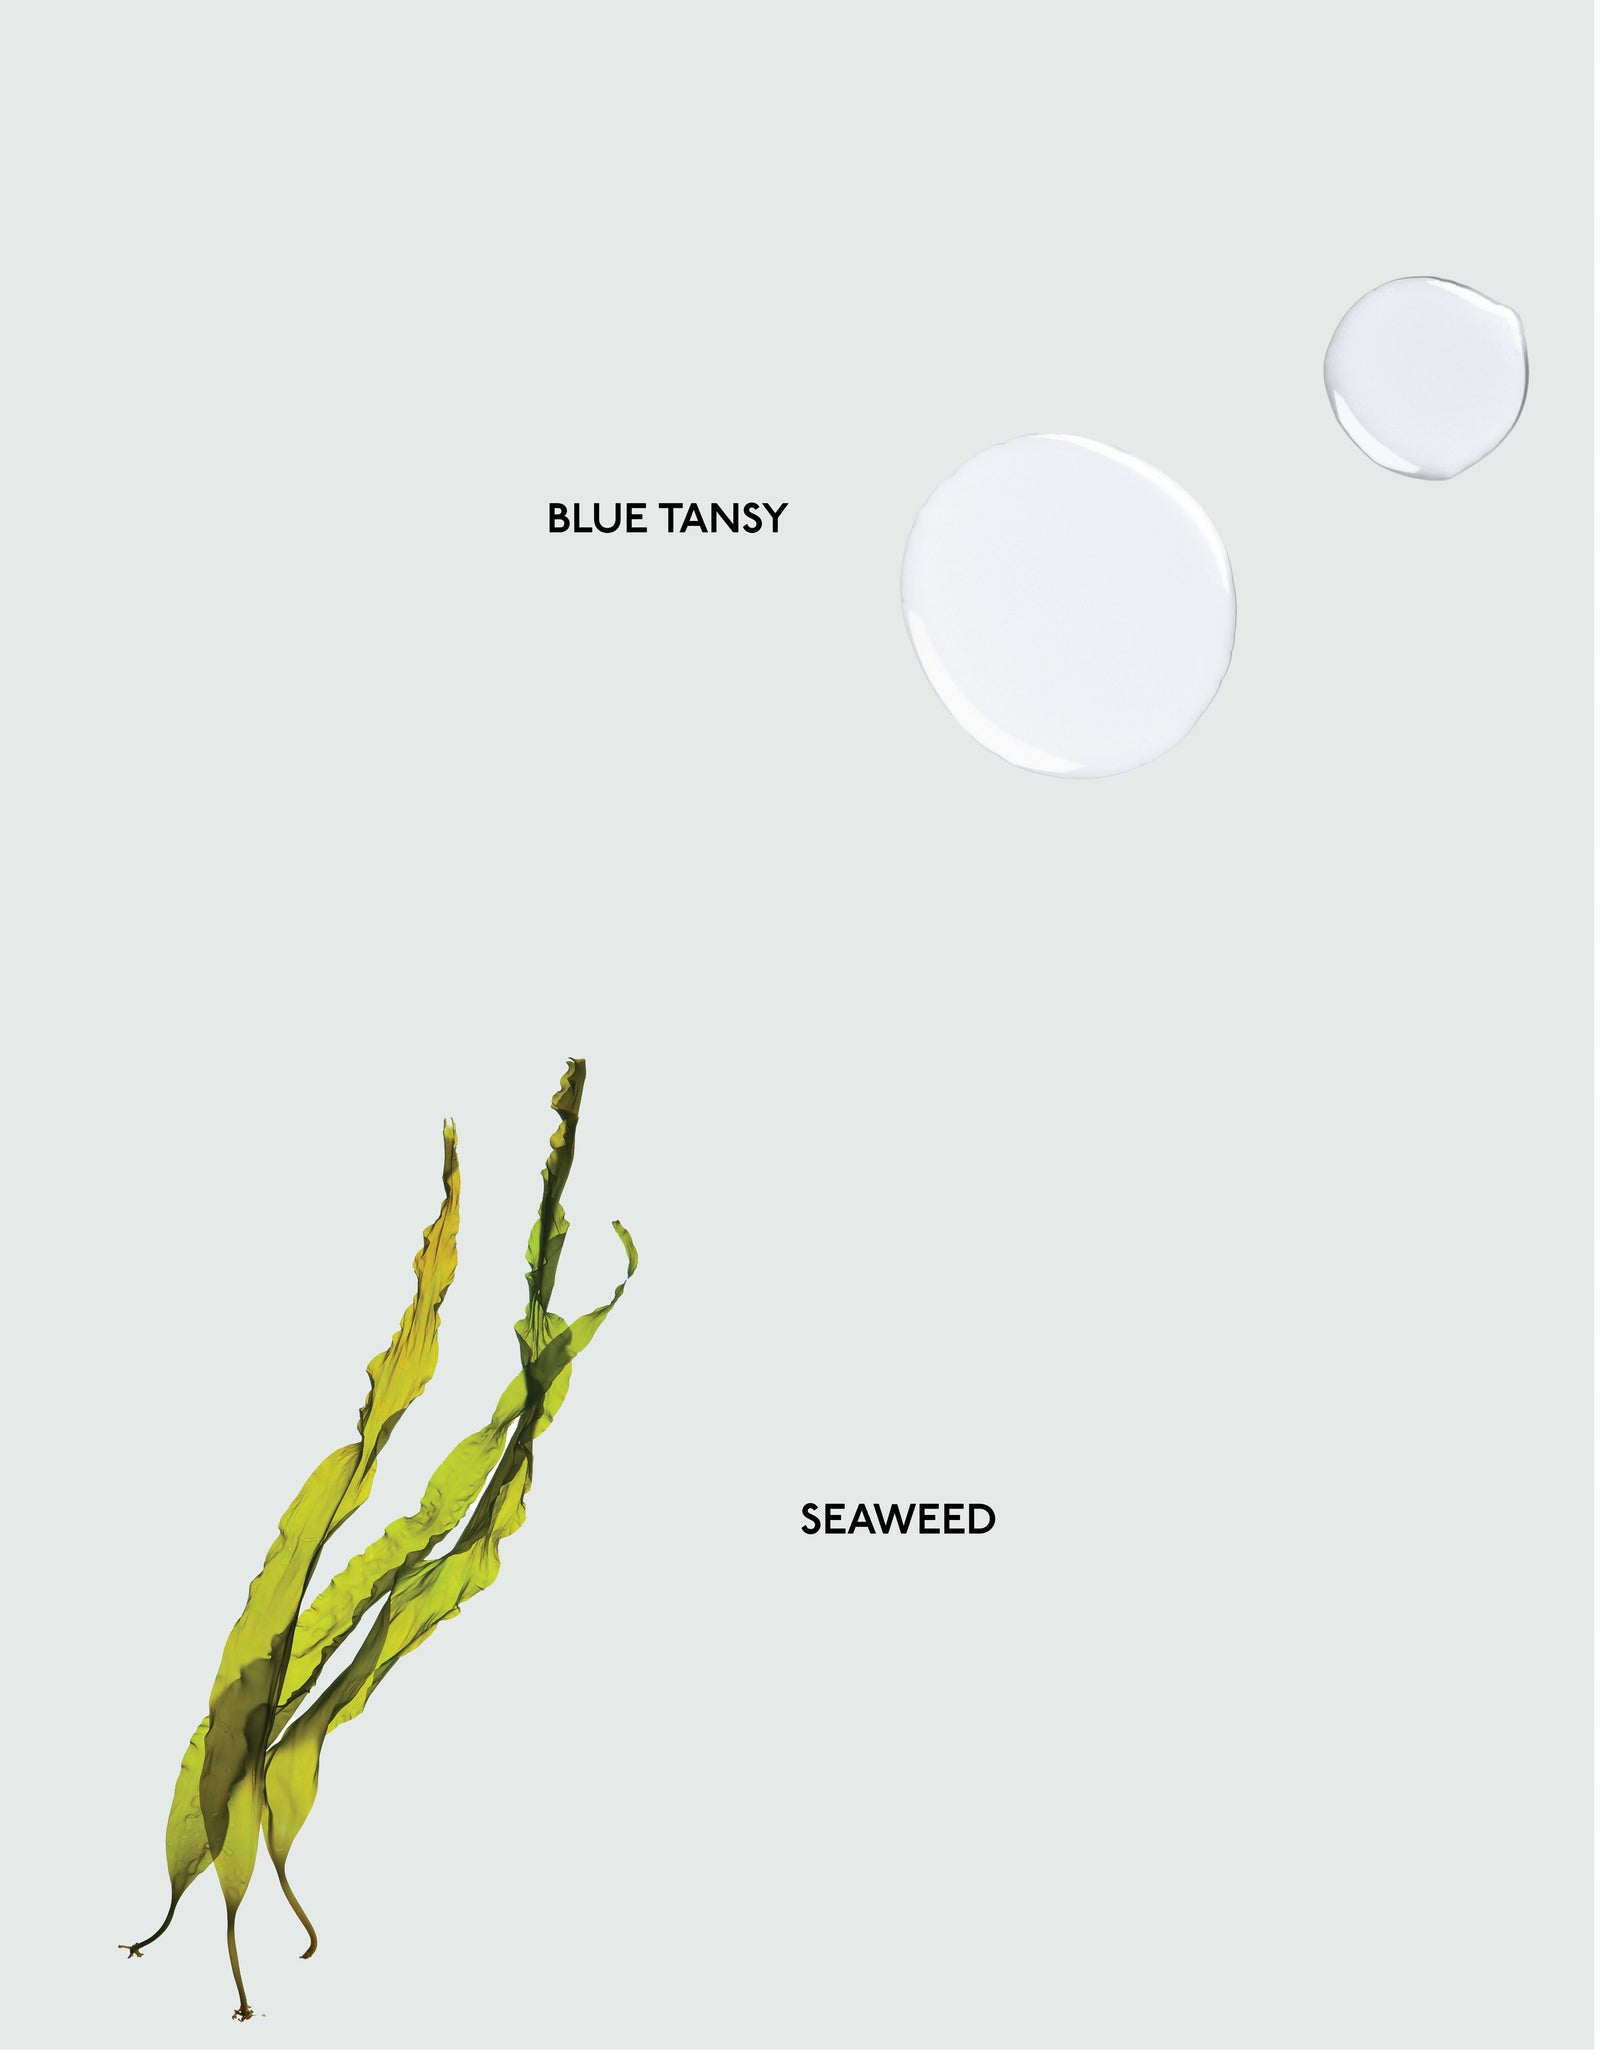 An illustration showcasing the benefits of two skincare ingredients. On the top right, clear drops represent blue tansy. At the bottom left, a bunch of green seaweed symbolizes the seaweed ingredient. Each is labeled accordingly with "Blue Tansy" and "Seaweed." The background is light gray. This visual represents key components of Cozy Earth's Body Oil.